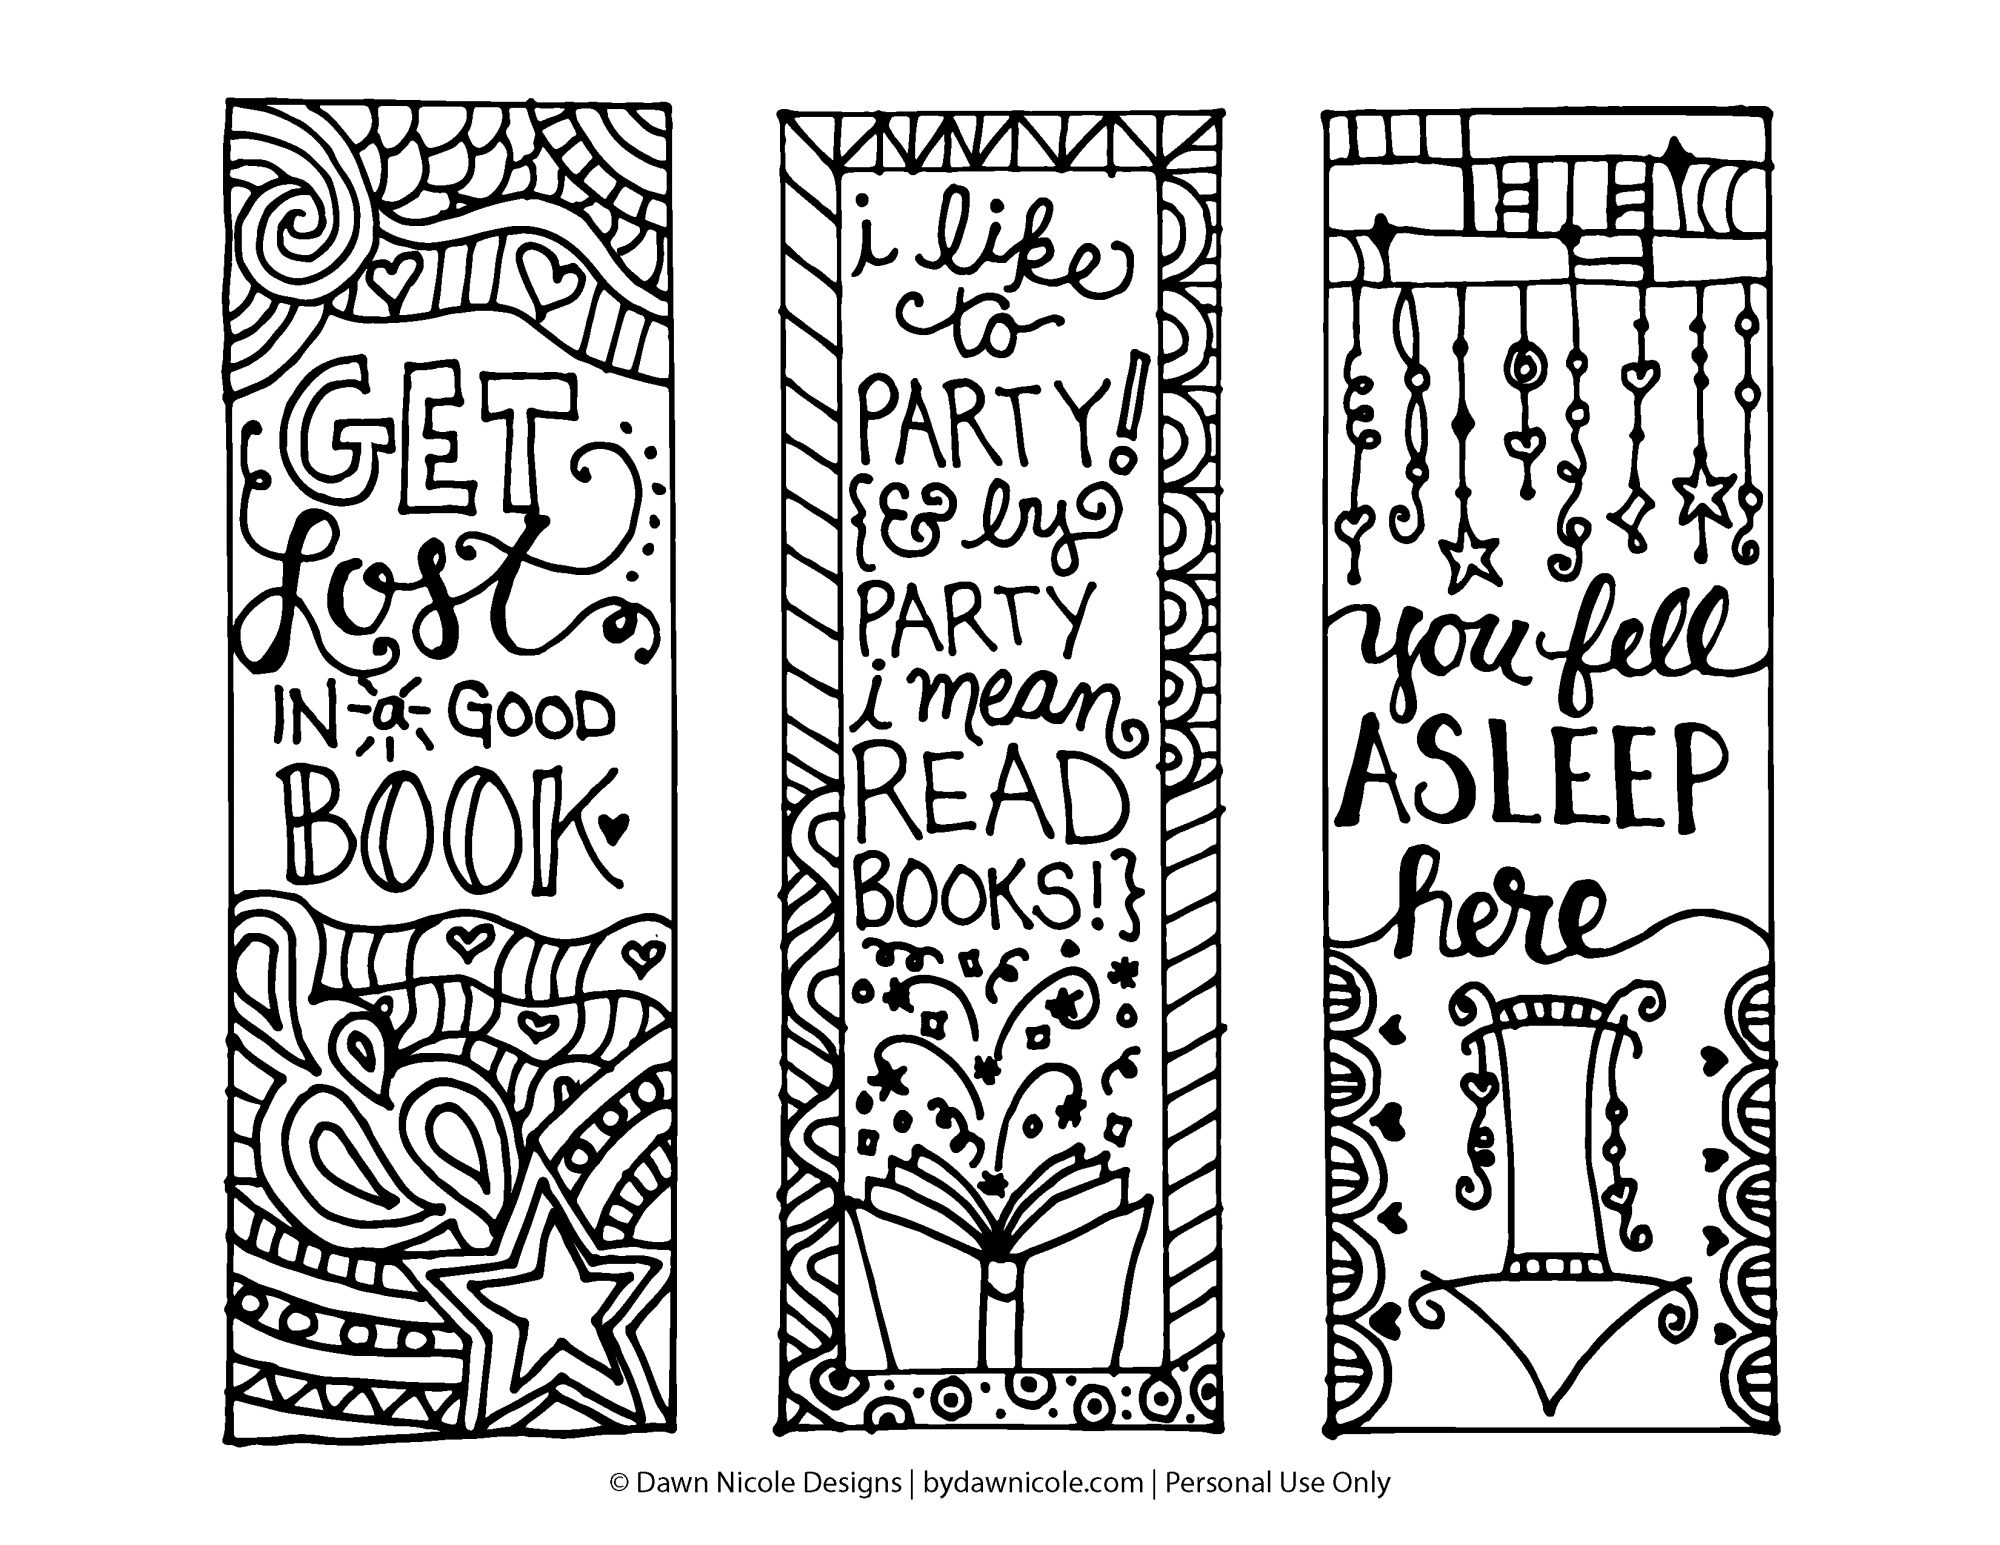 Free Printable Coloring Page Bookmarks | Dawn Nicole Designs® - Free Printable Sports Bookmarks